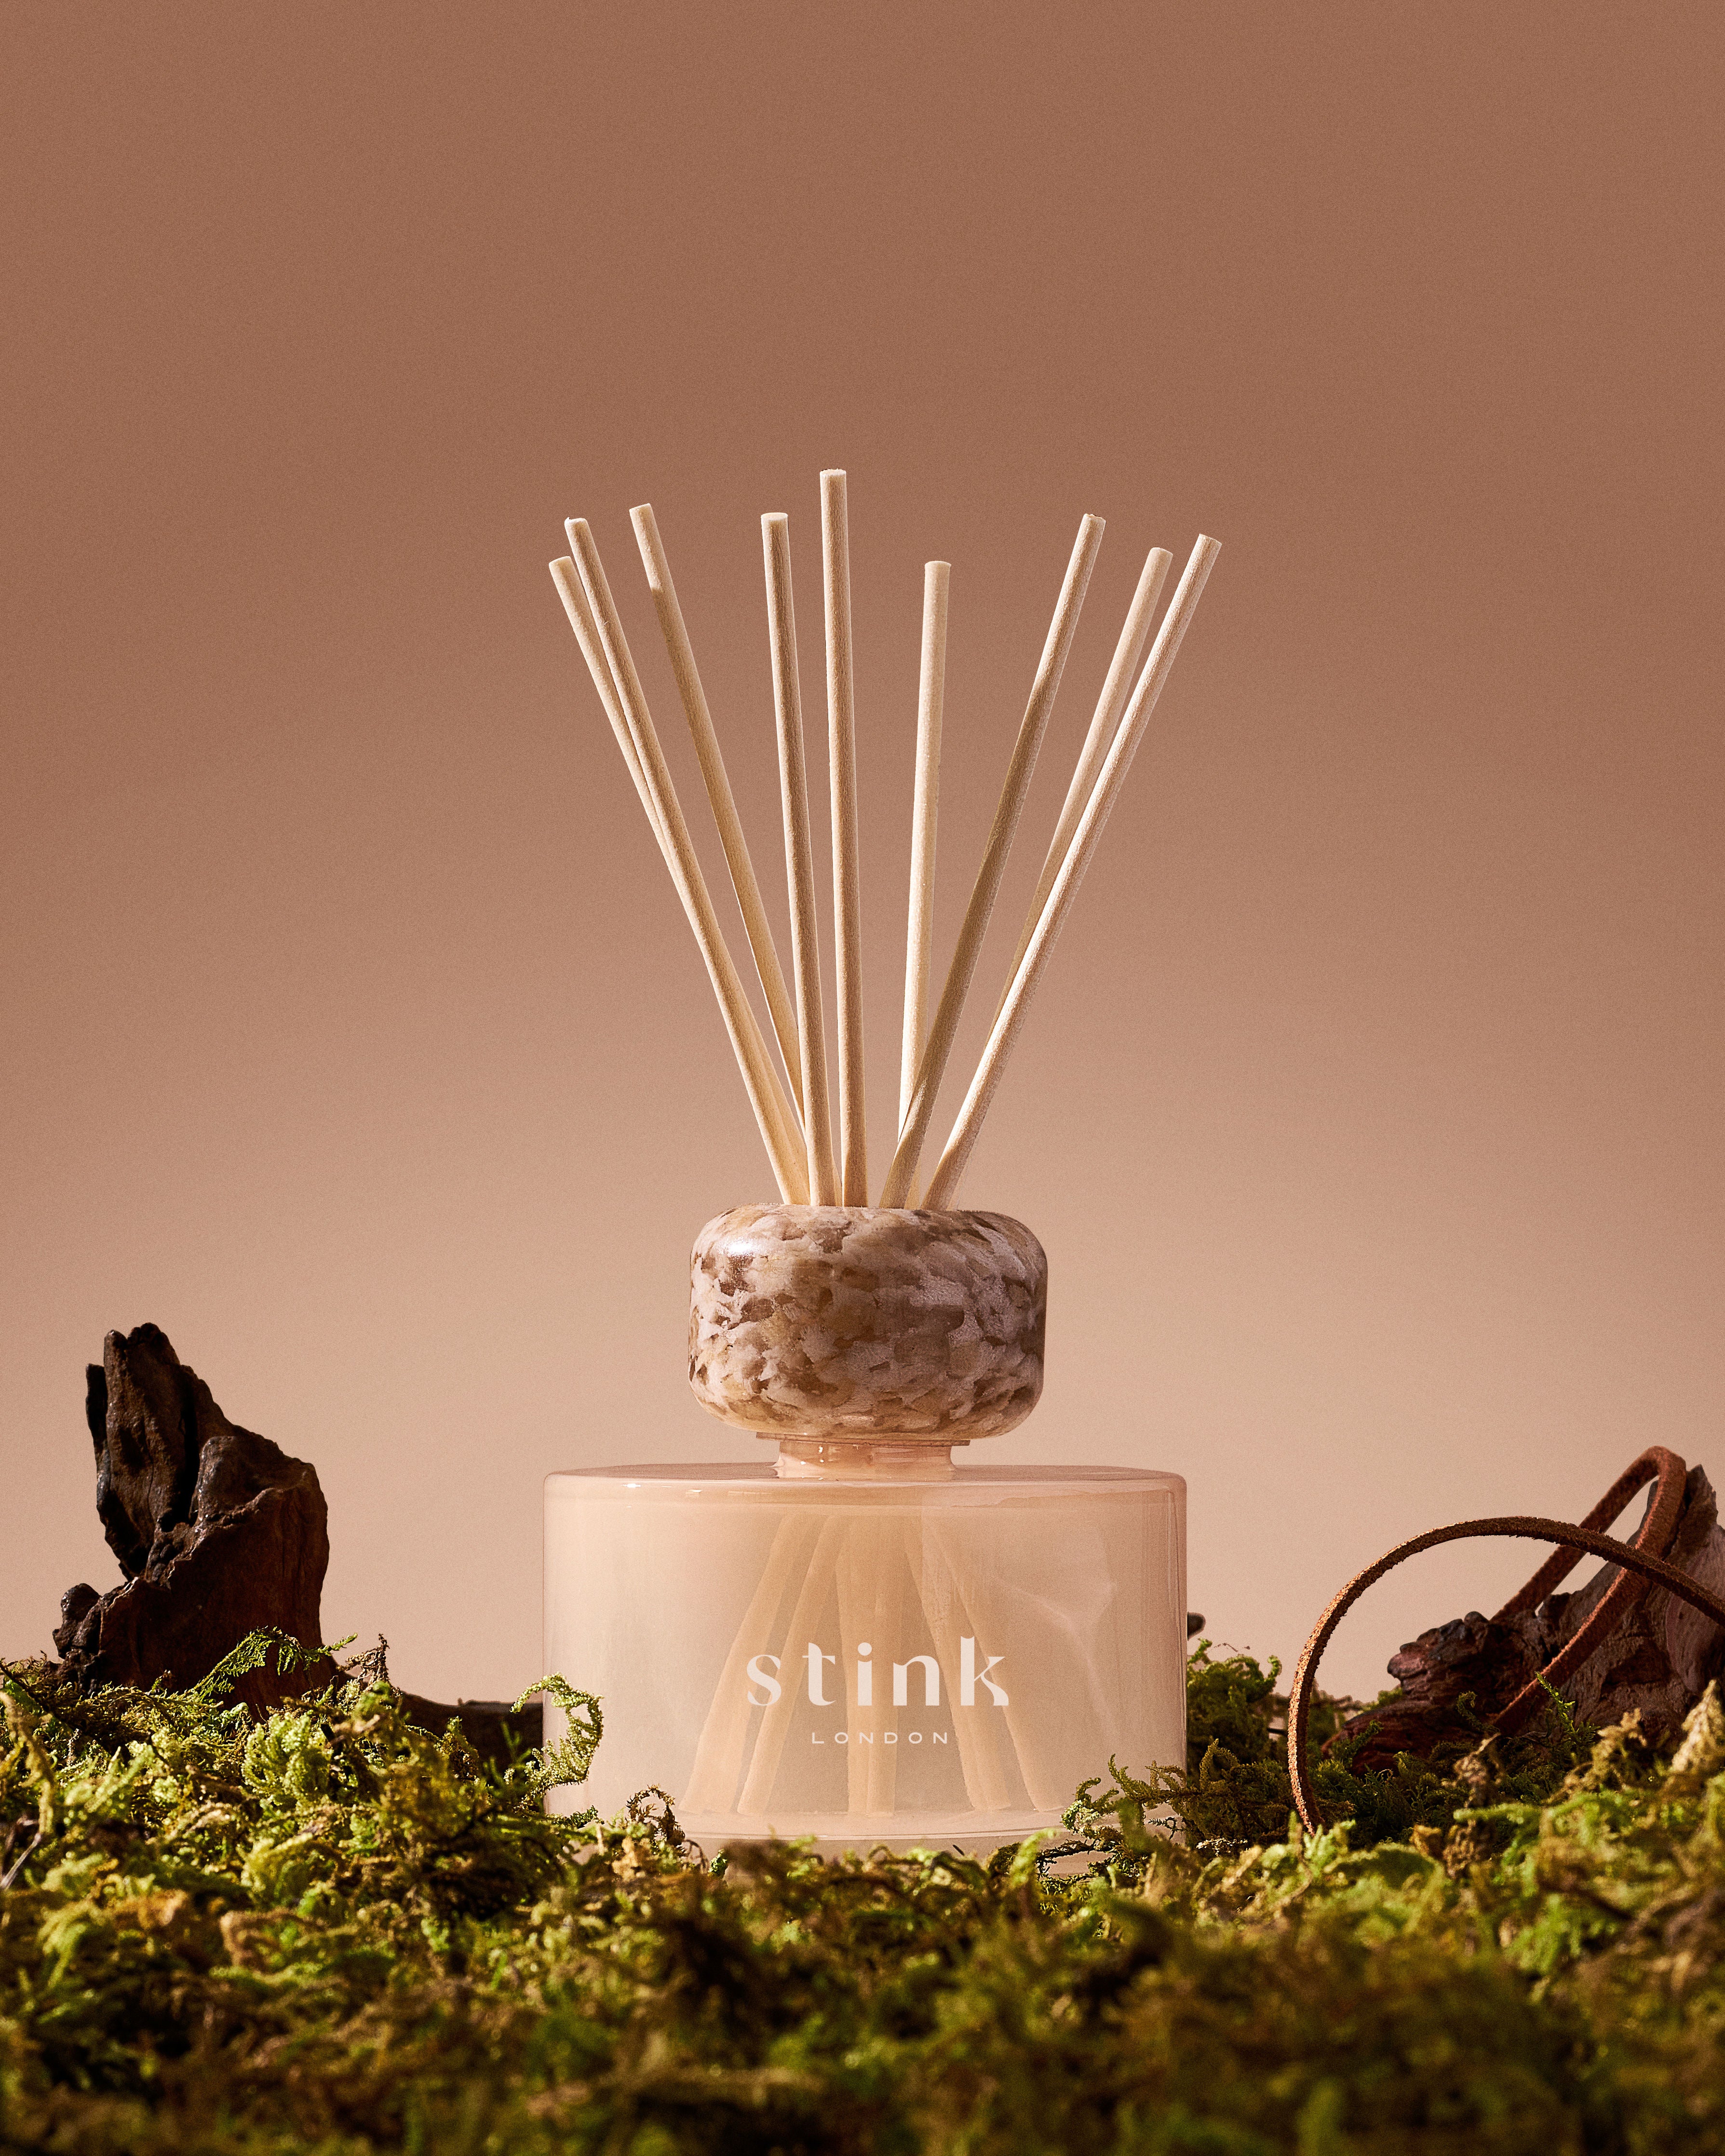 Stink London get a room reed diffuser subscription santal  refillable refill pouches home fragrance